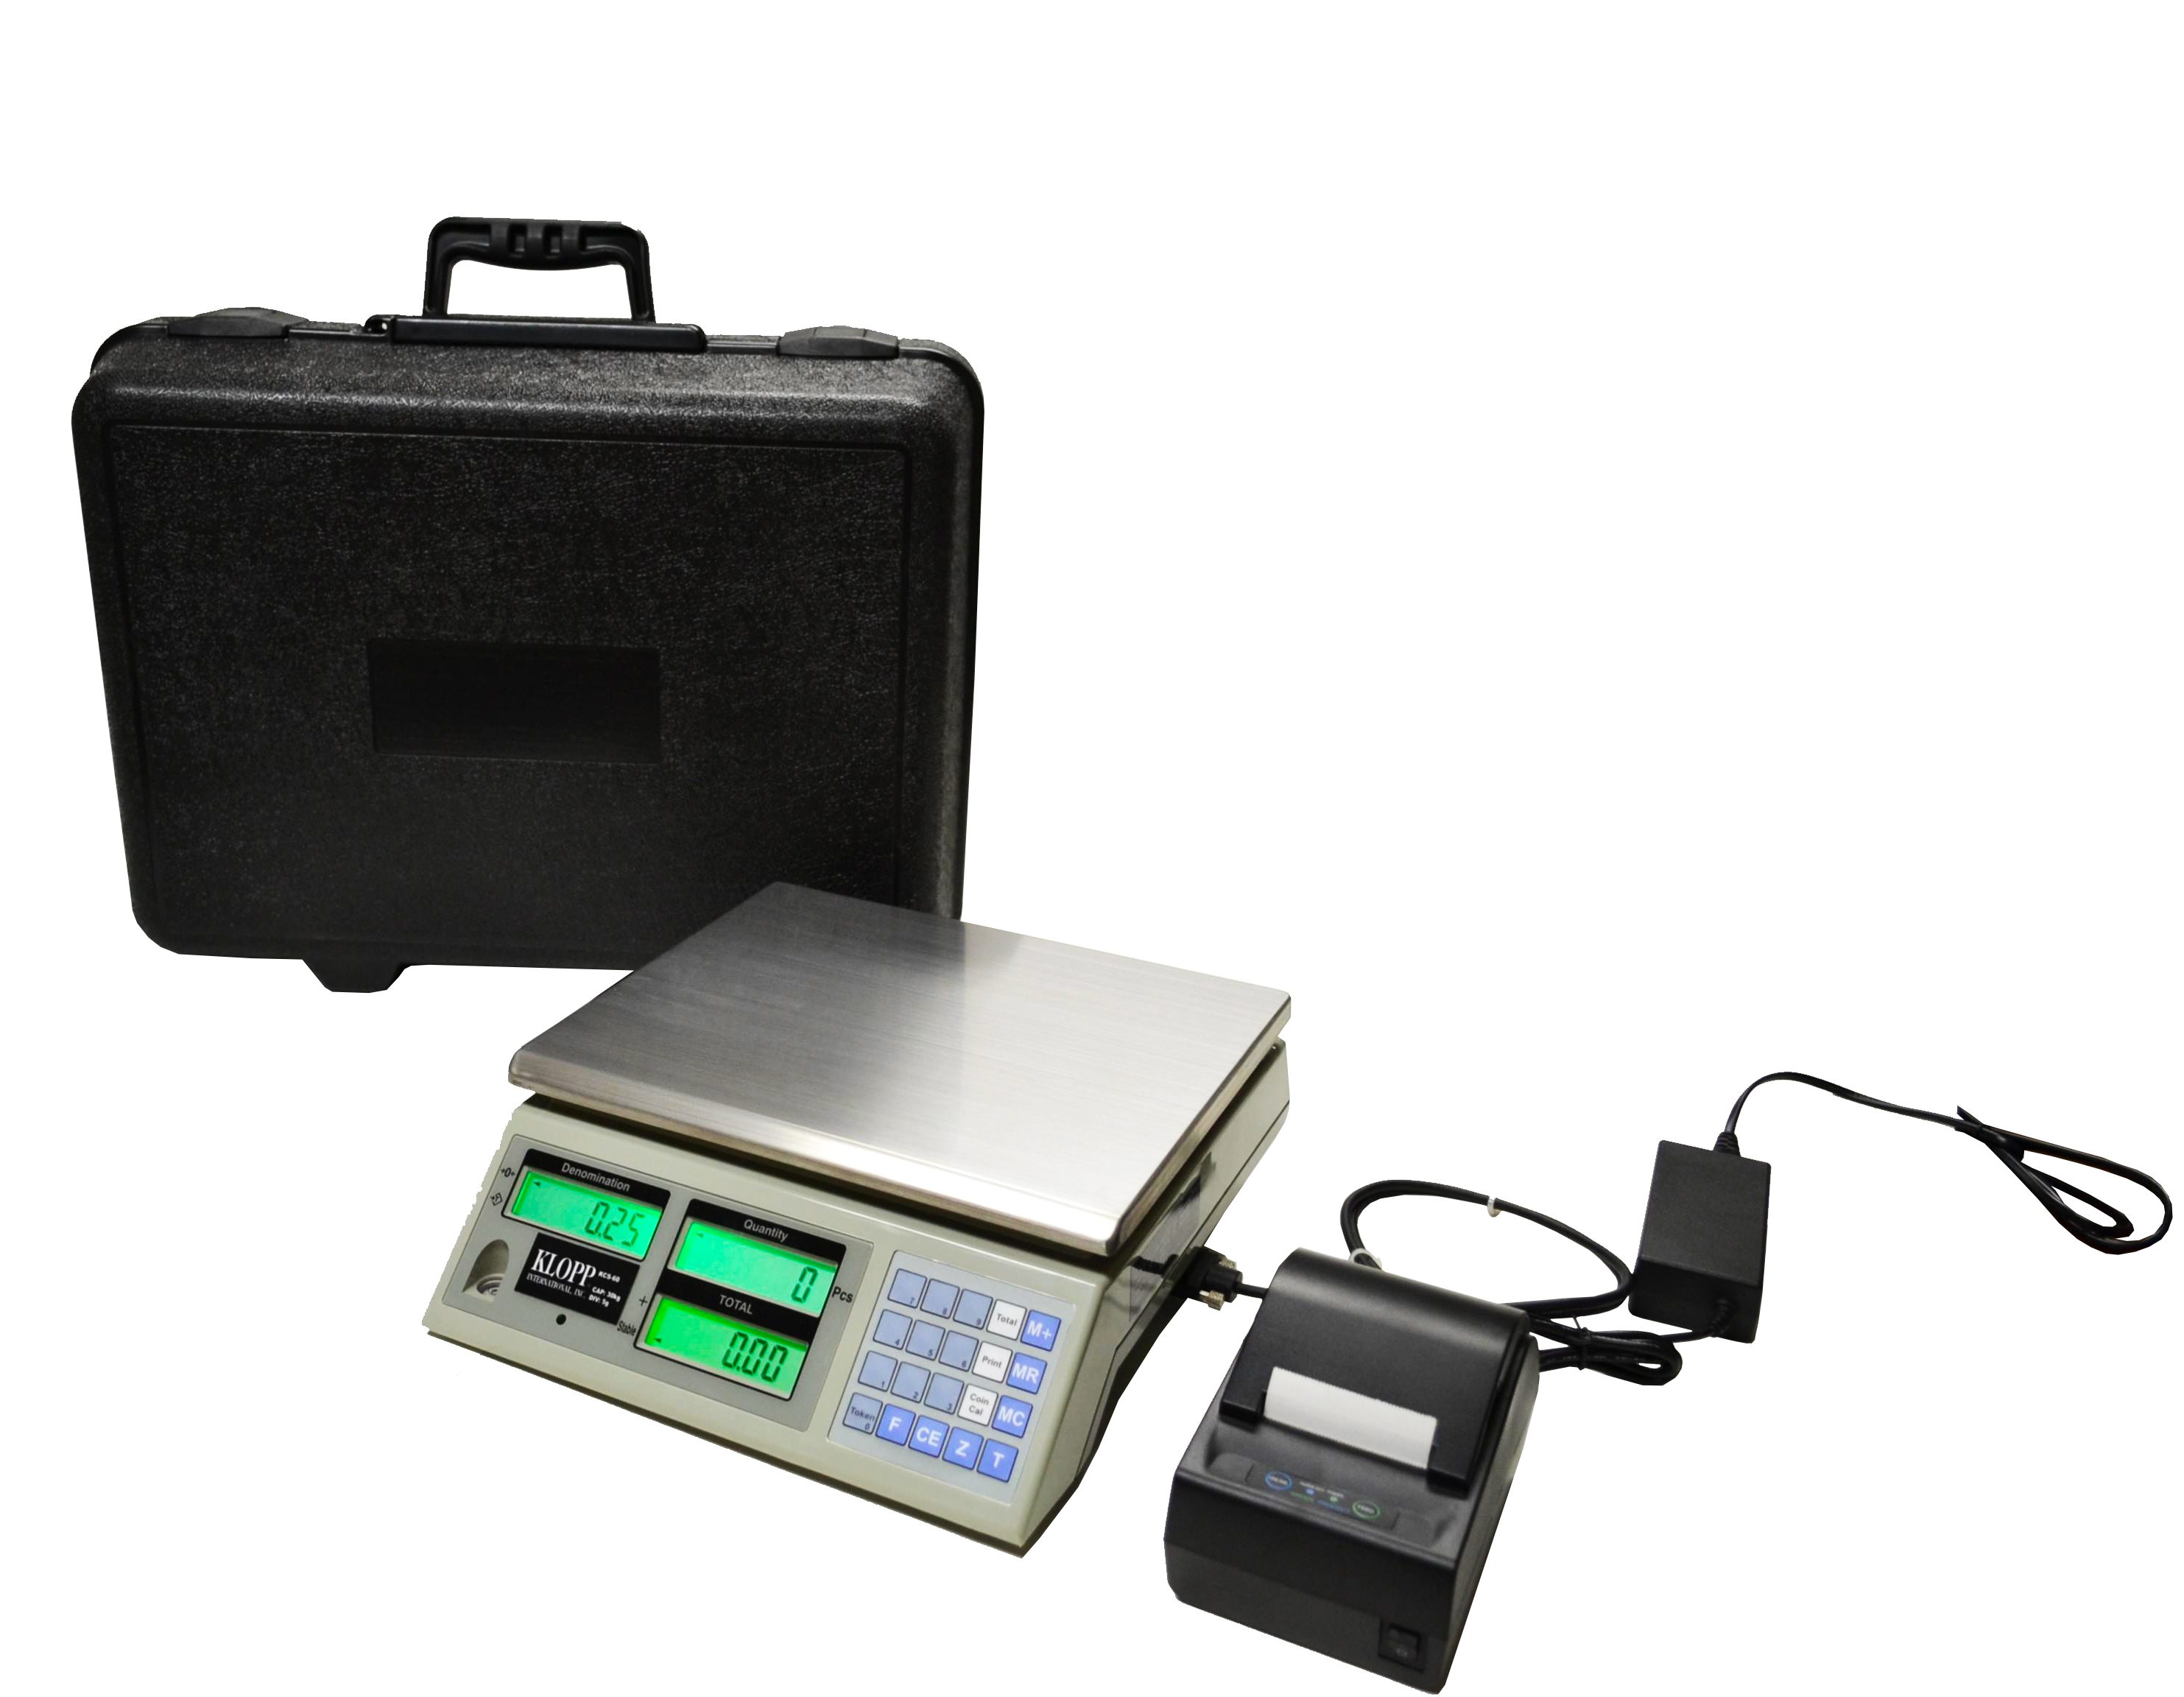 Portable, Battery-Operated Scales Weigh Coins, Tokens ...